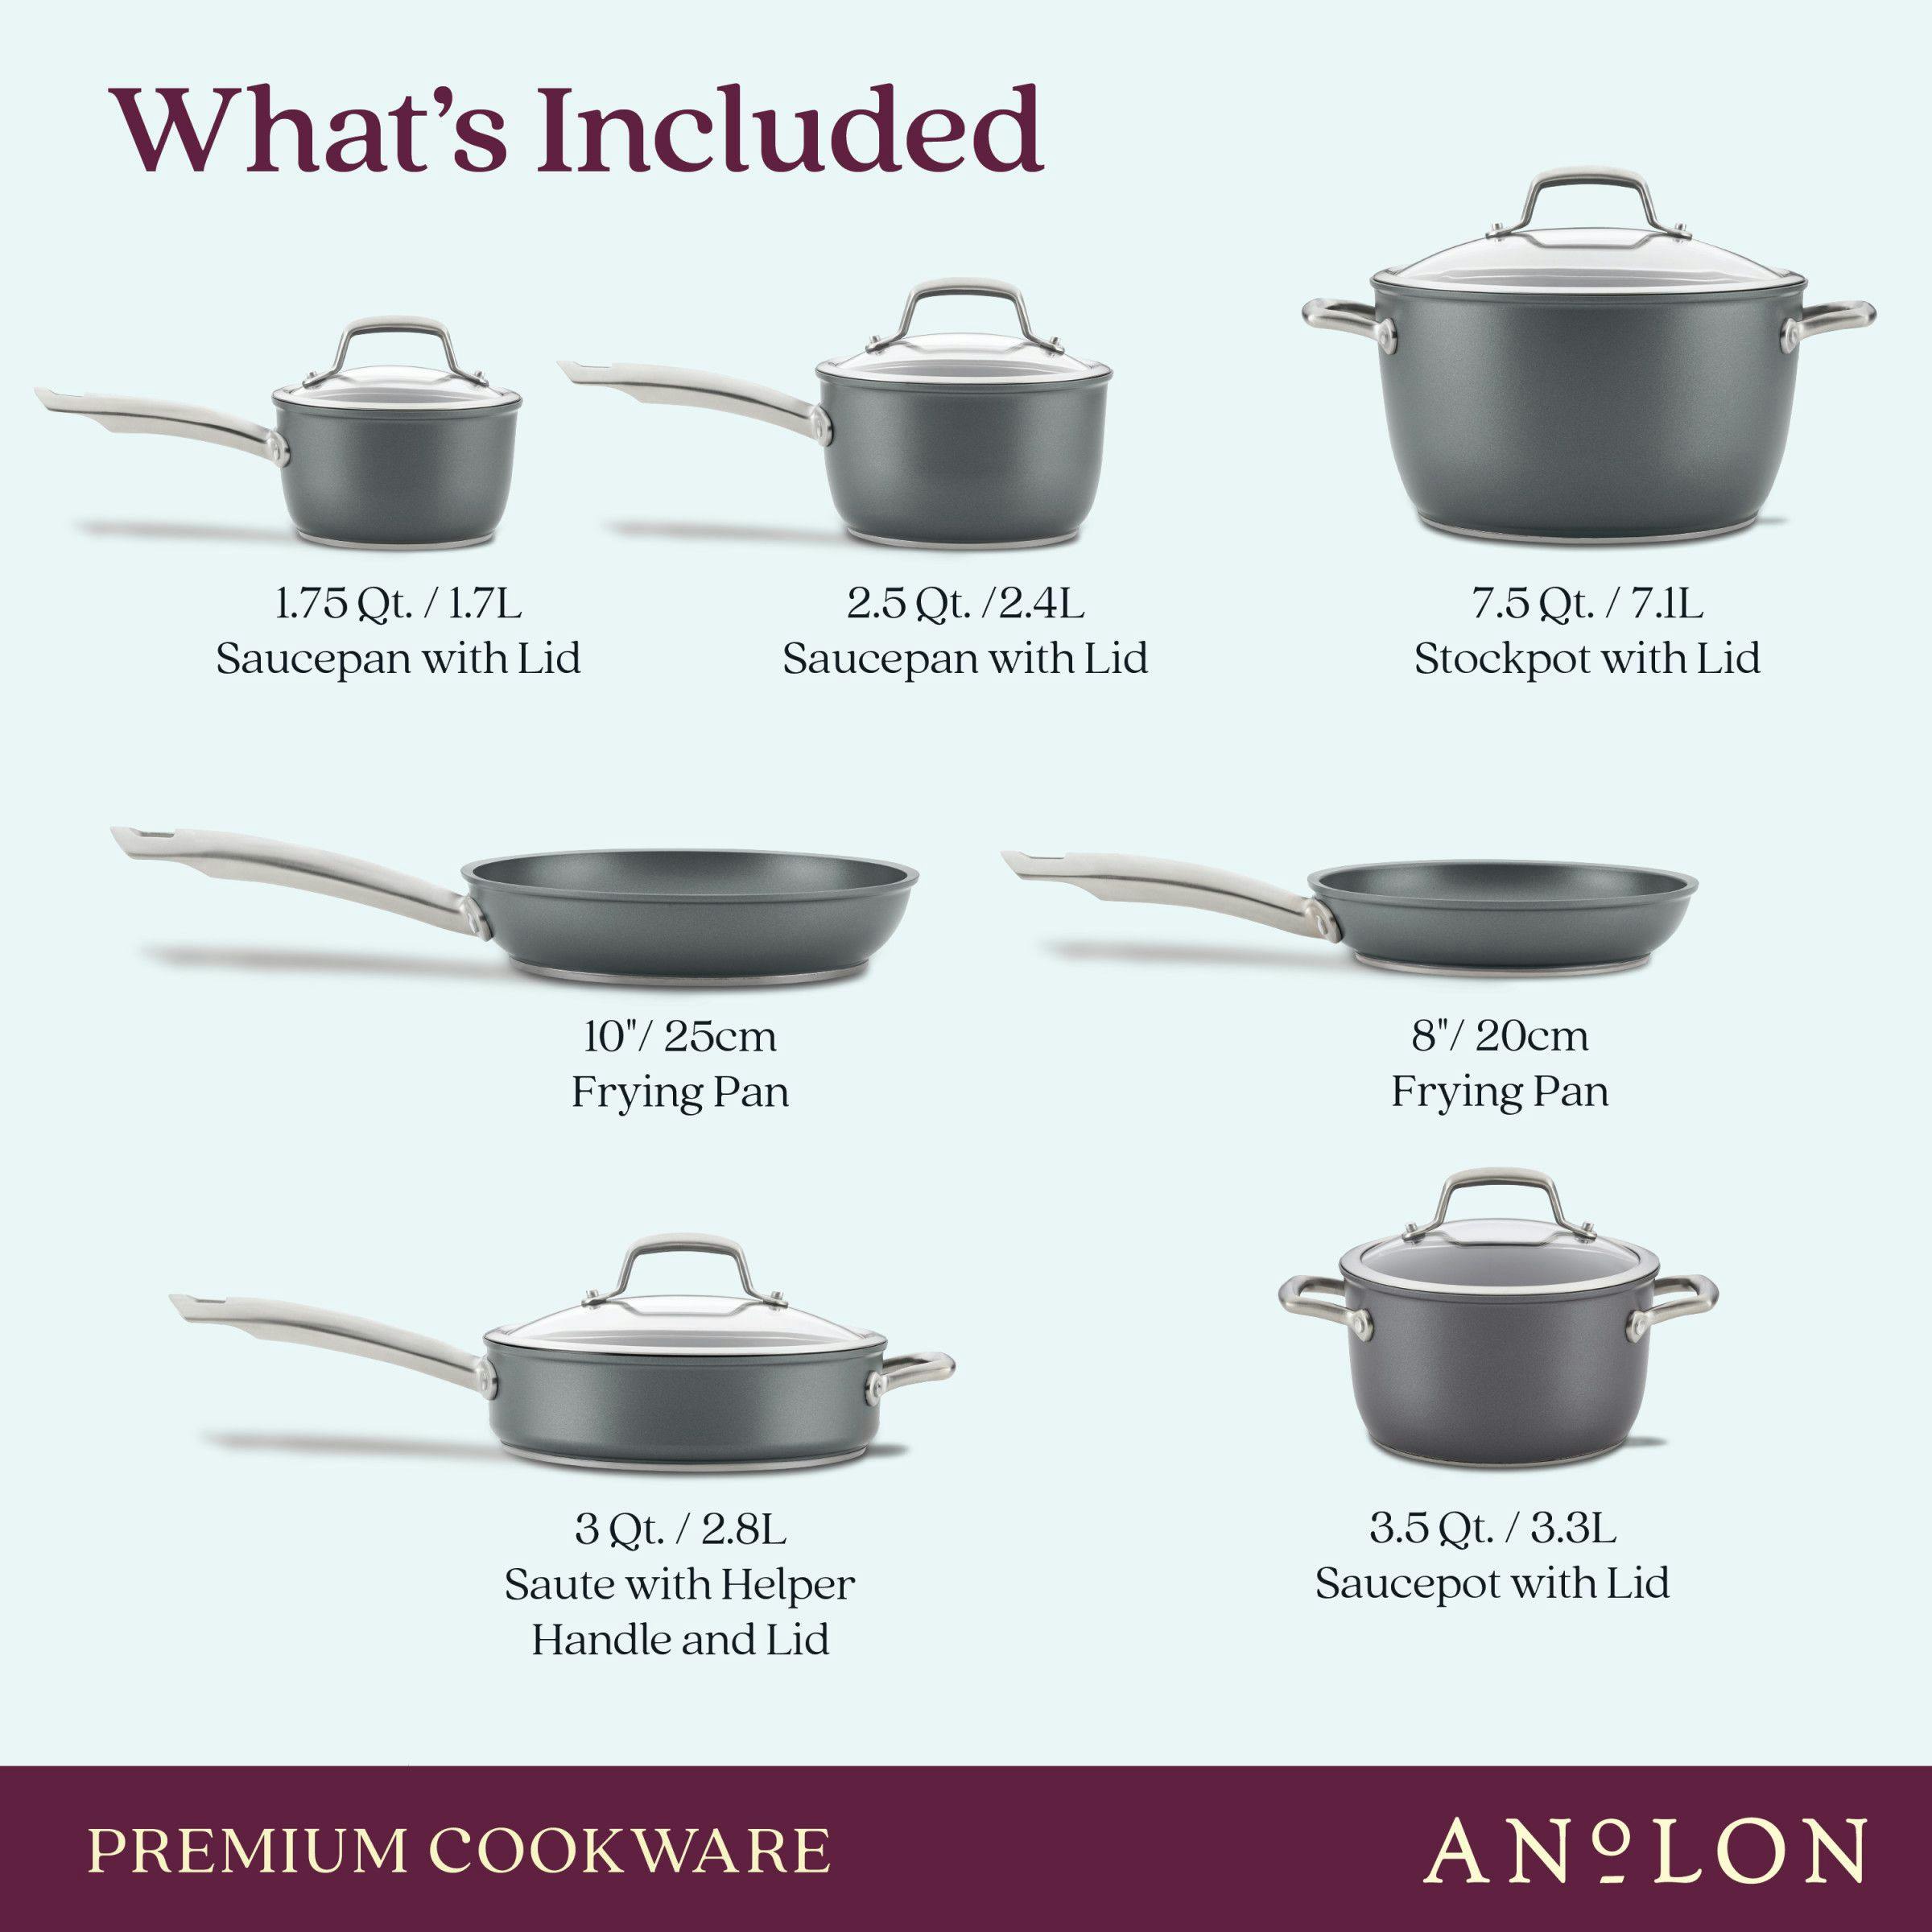 Anolon Accolade Forged Hard-Anodized Nonstick Cookware Induction Pots and Pans Set, 12-Piece, Moonstone